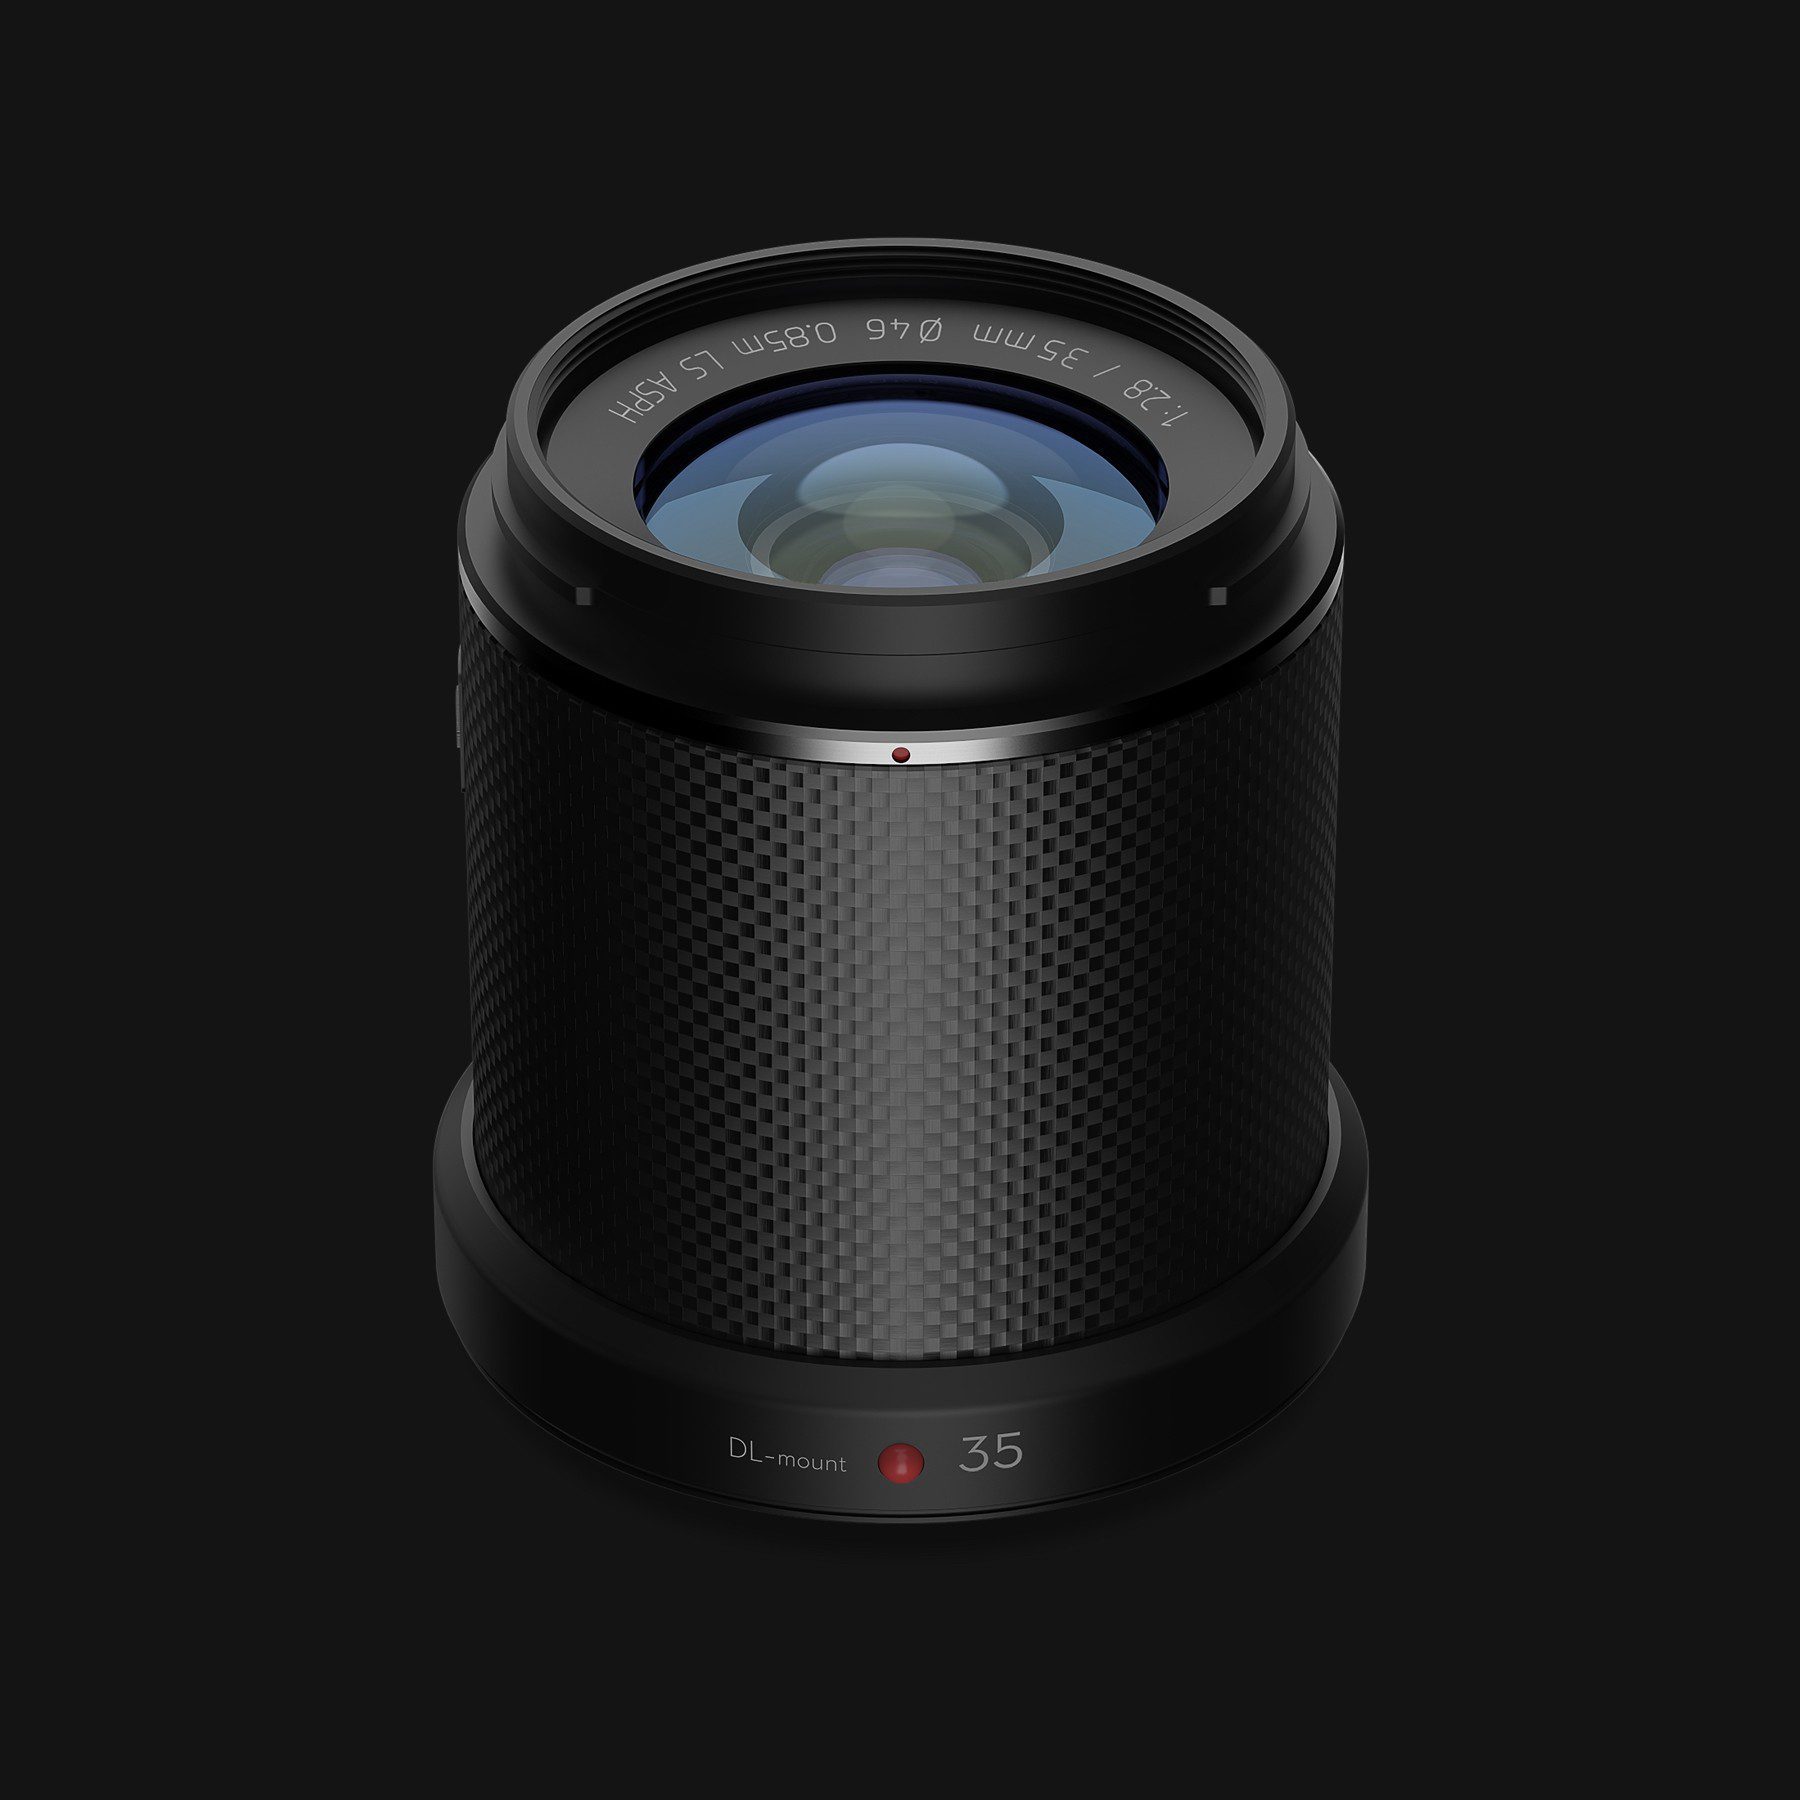 DJI DL 35mm f/2.8 LS ASPH for Zenmuse X7